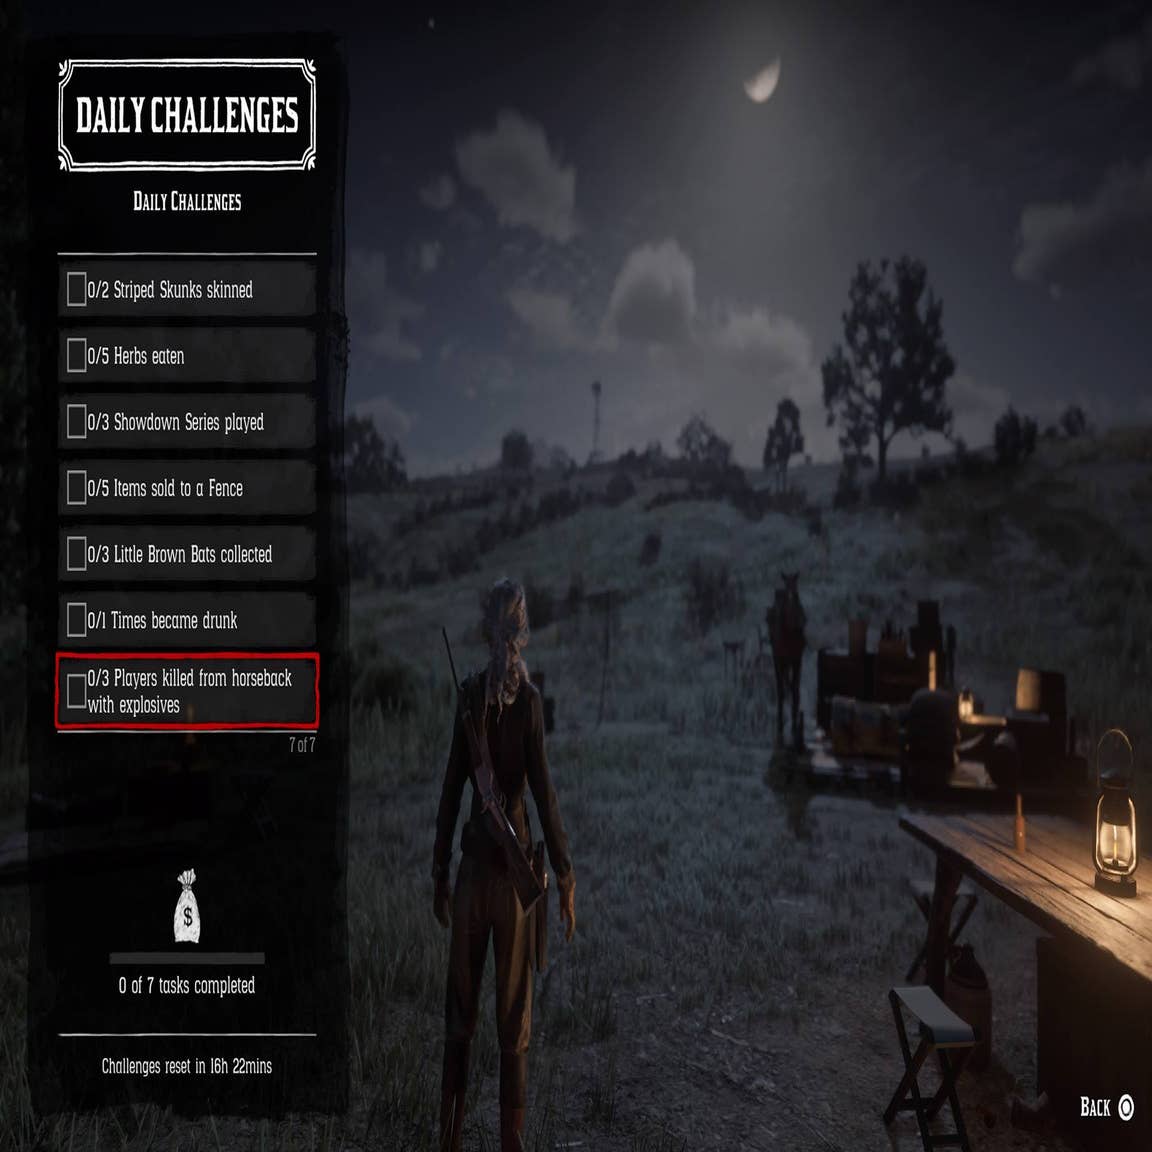 Griefing players is about to become harder in Red Dead Online